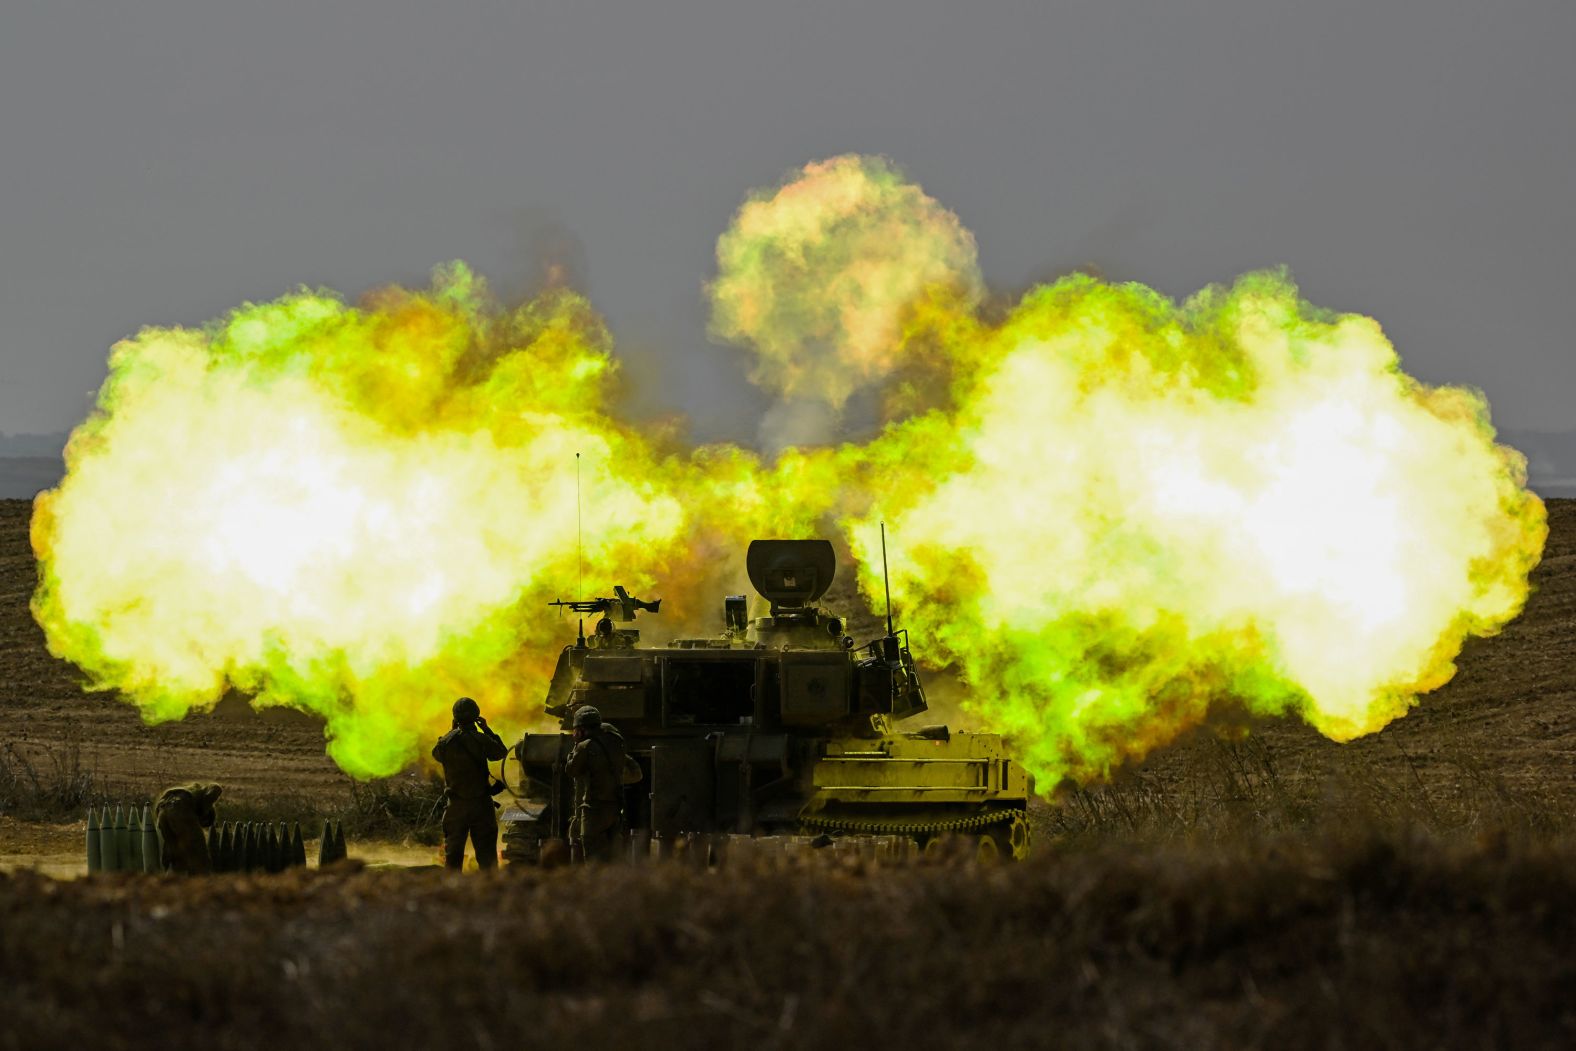 An Israeli soldier covers his ears as a shell is fired toward Gaza near Netivot, Israel, on Wednesday, October 11.